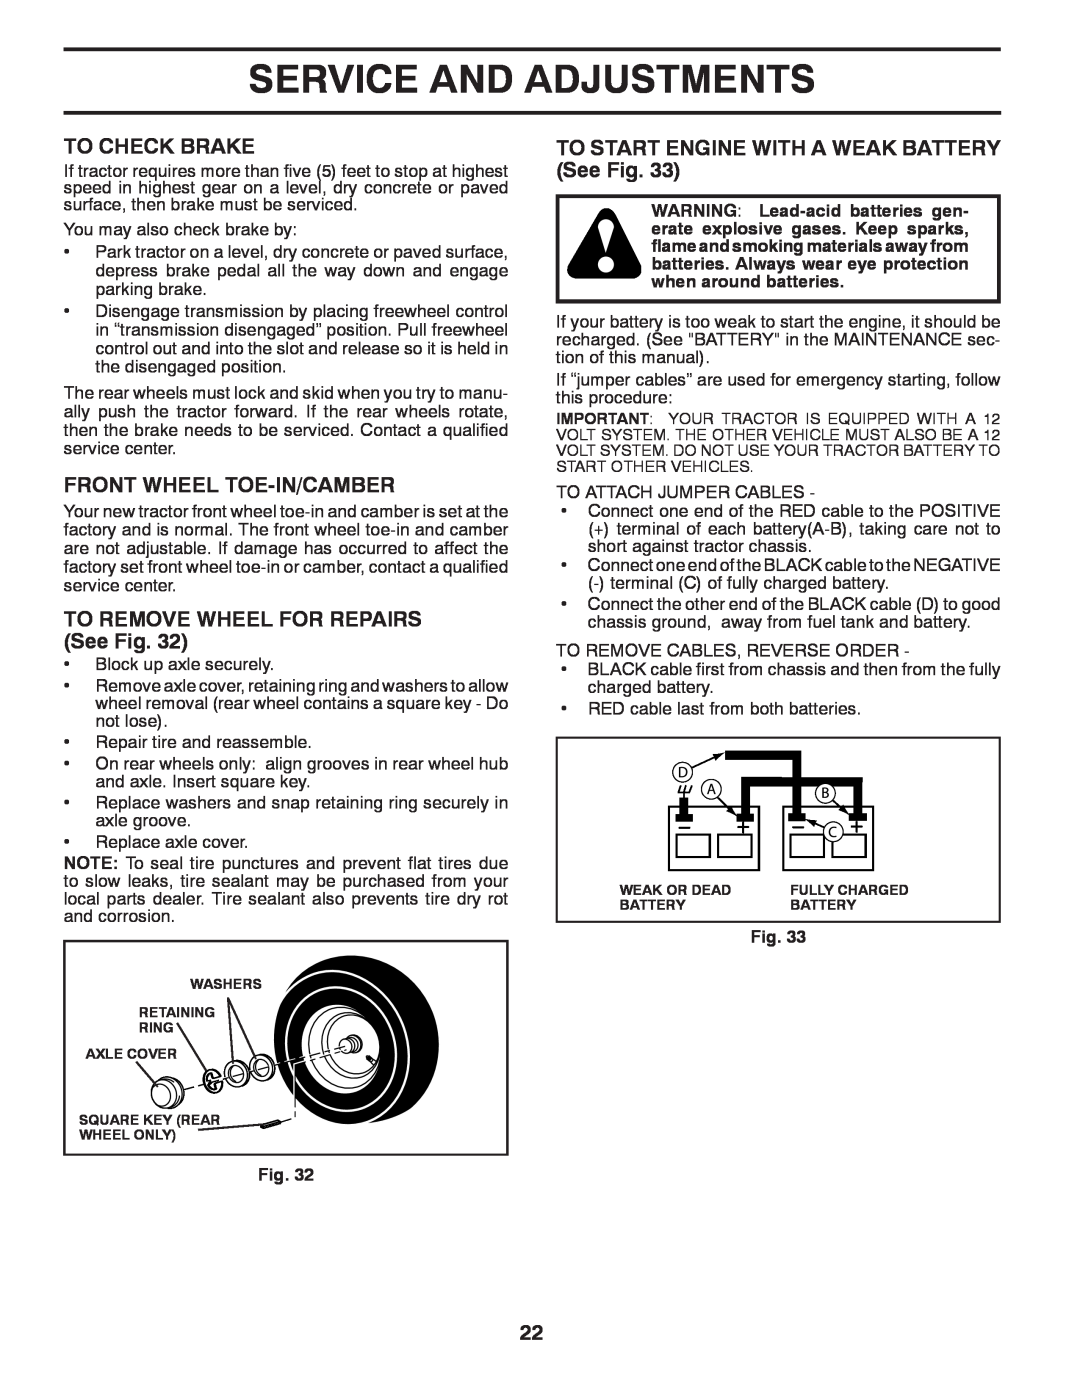 Husqvarna 917.289541 owner manual To Check Brake, Front Wheel Toe-In/Camber, TO REMOVE WHEEL FOR REPAIRS See Fig 